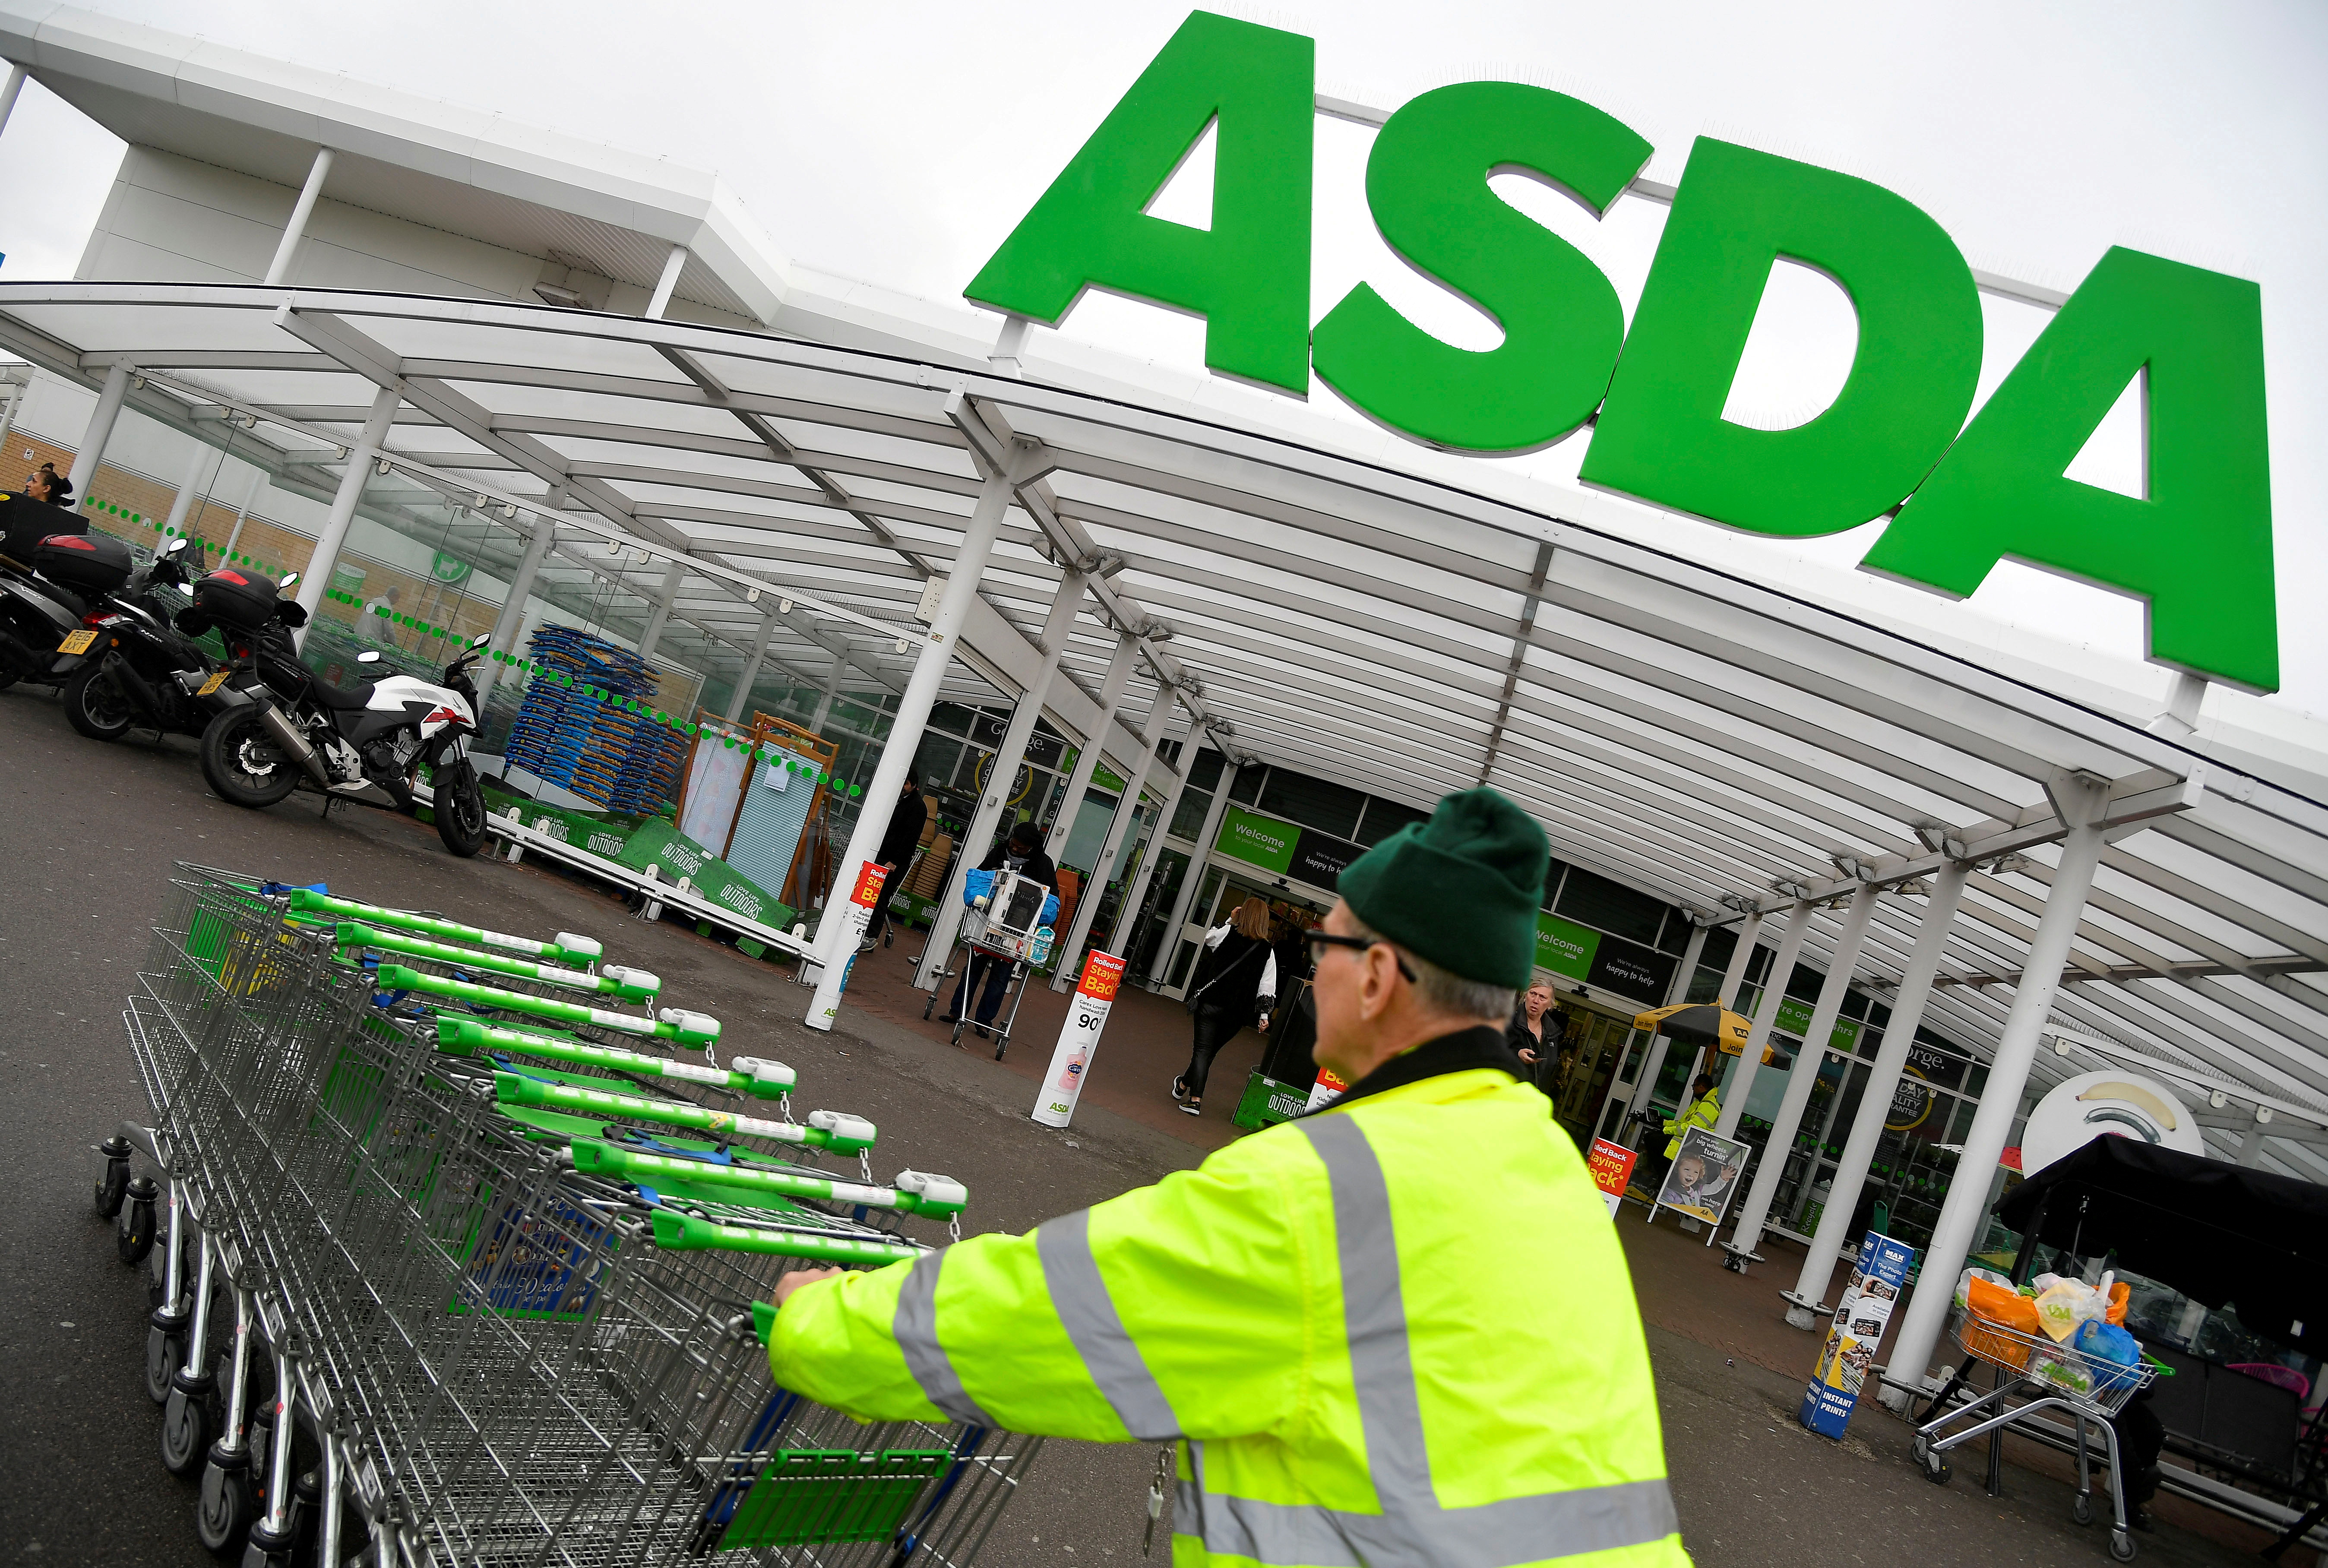 A worker pushes shopping trolleys at an Asda store in west London, Britain, April 28, 2018. REUTERS/Toby Melville